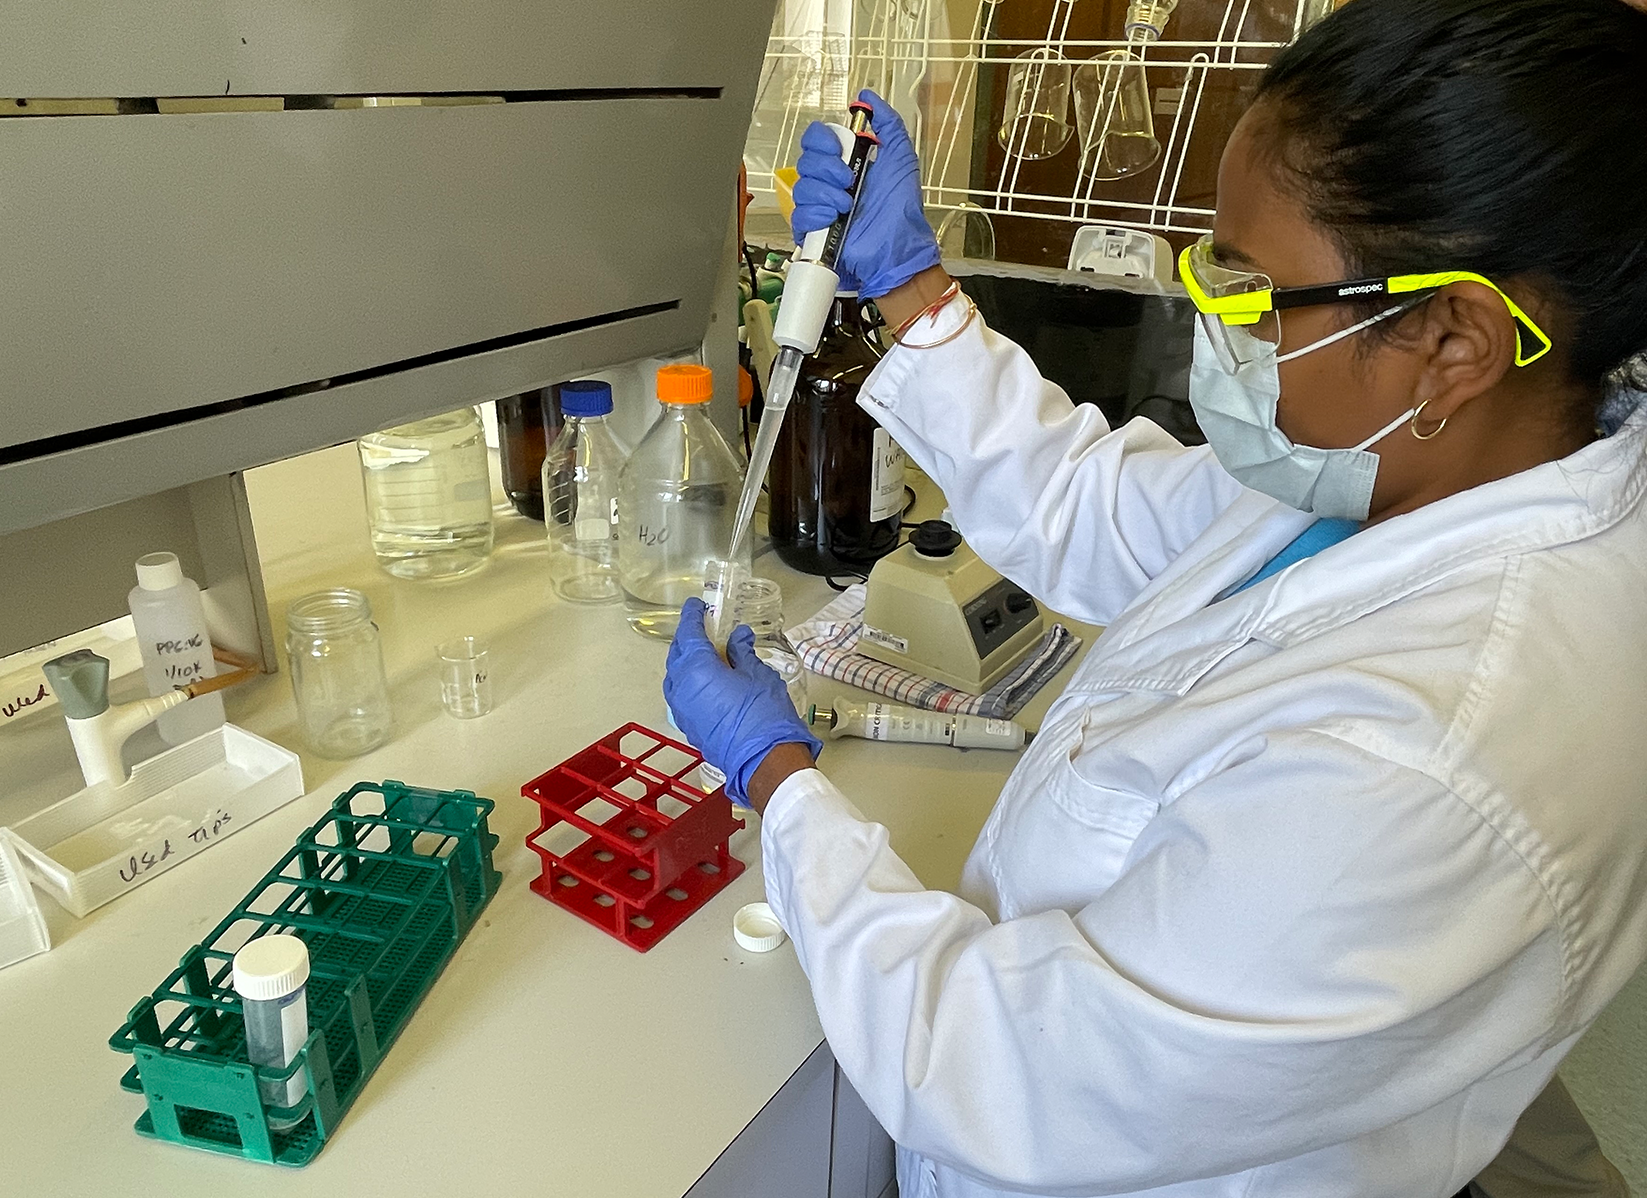 A woman in a lab coat and safety glasses using a pipette and test tubes.